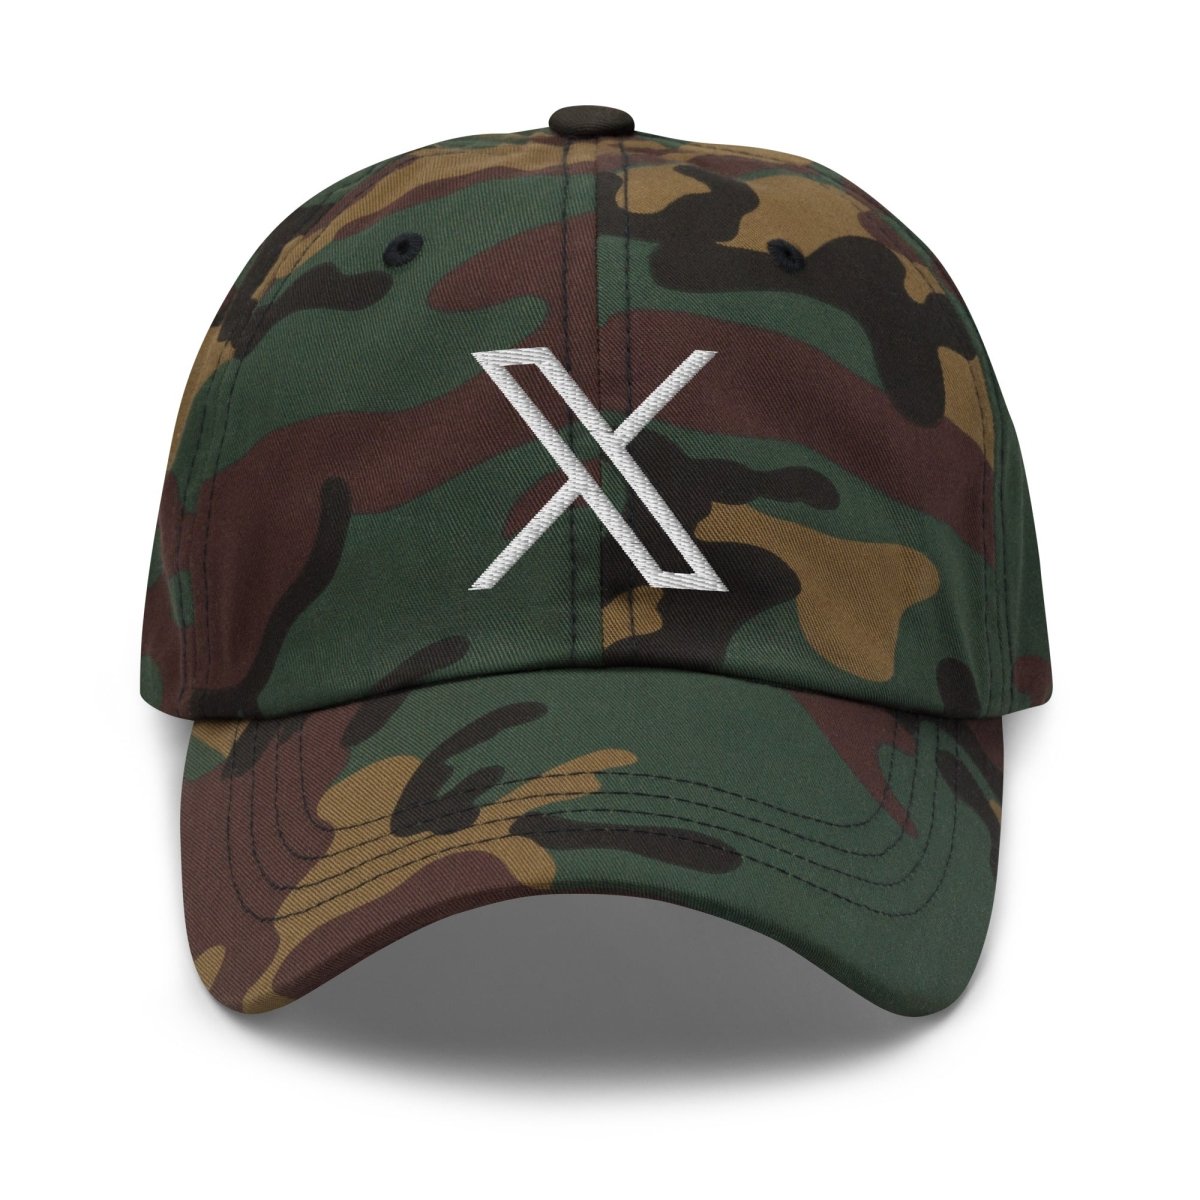 Twitter X Logo Embroidered Cap - Green Camo - AI Store